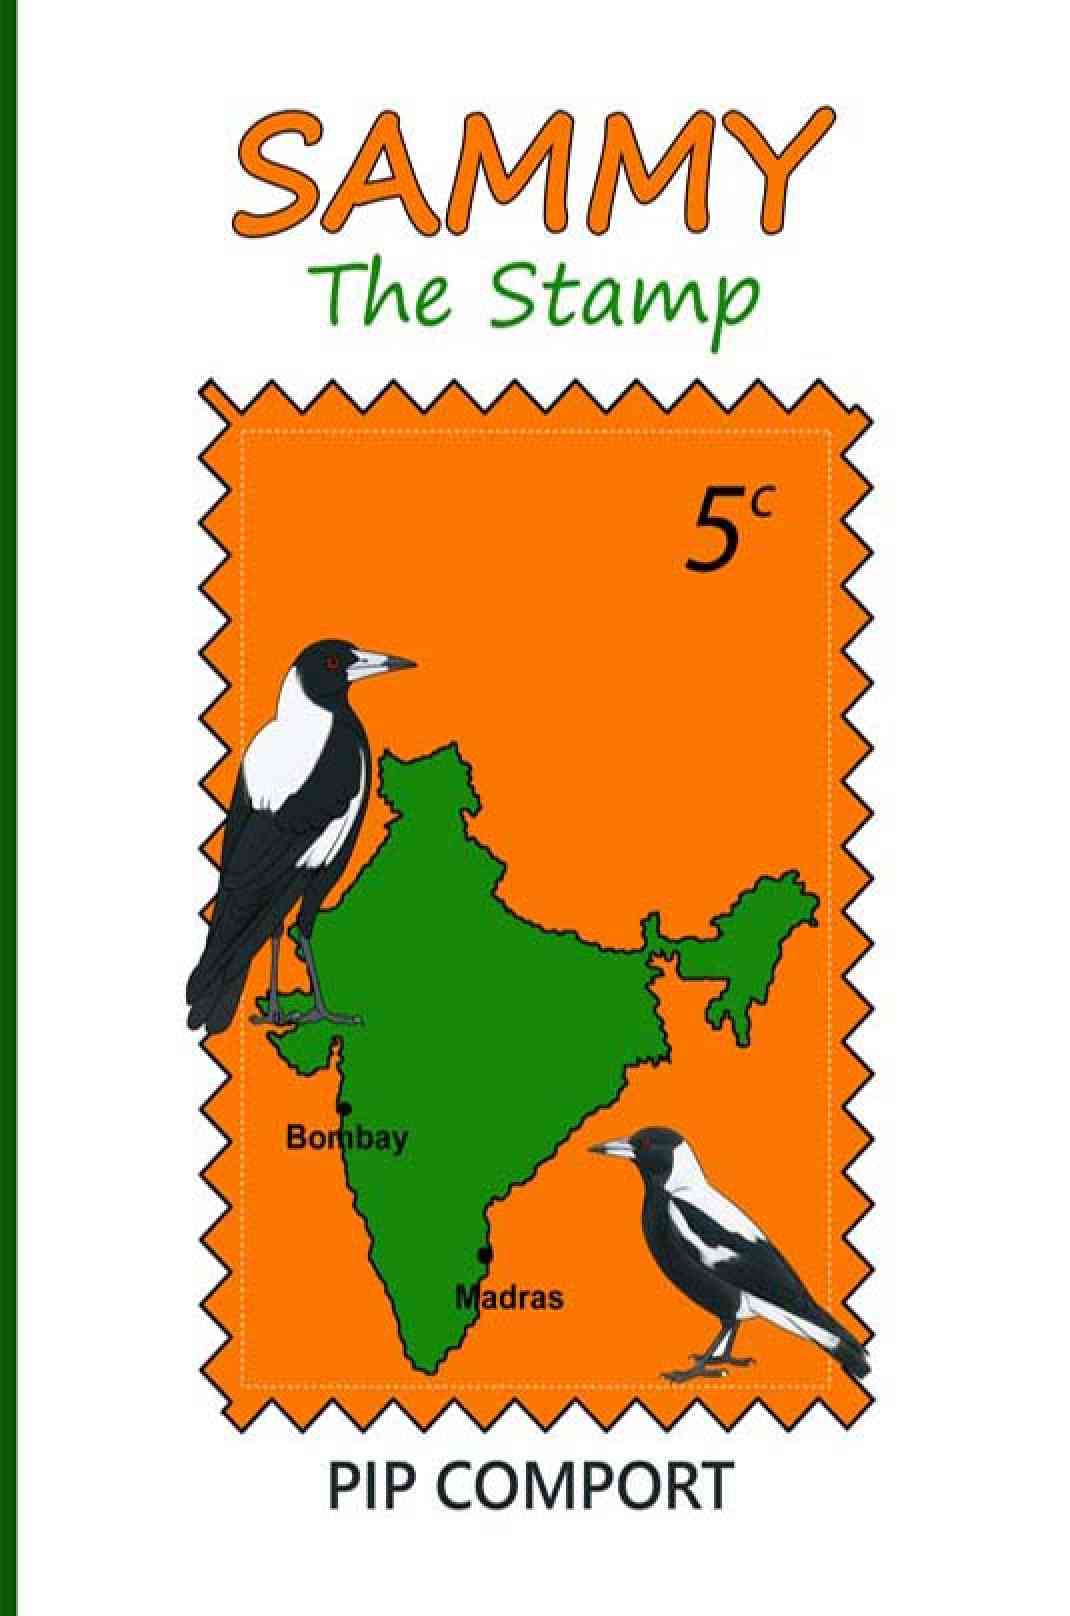 Sammy the Stamp by Pip Comport Was Reviewed by Stamp Lovers Website